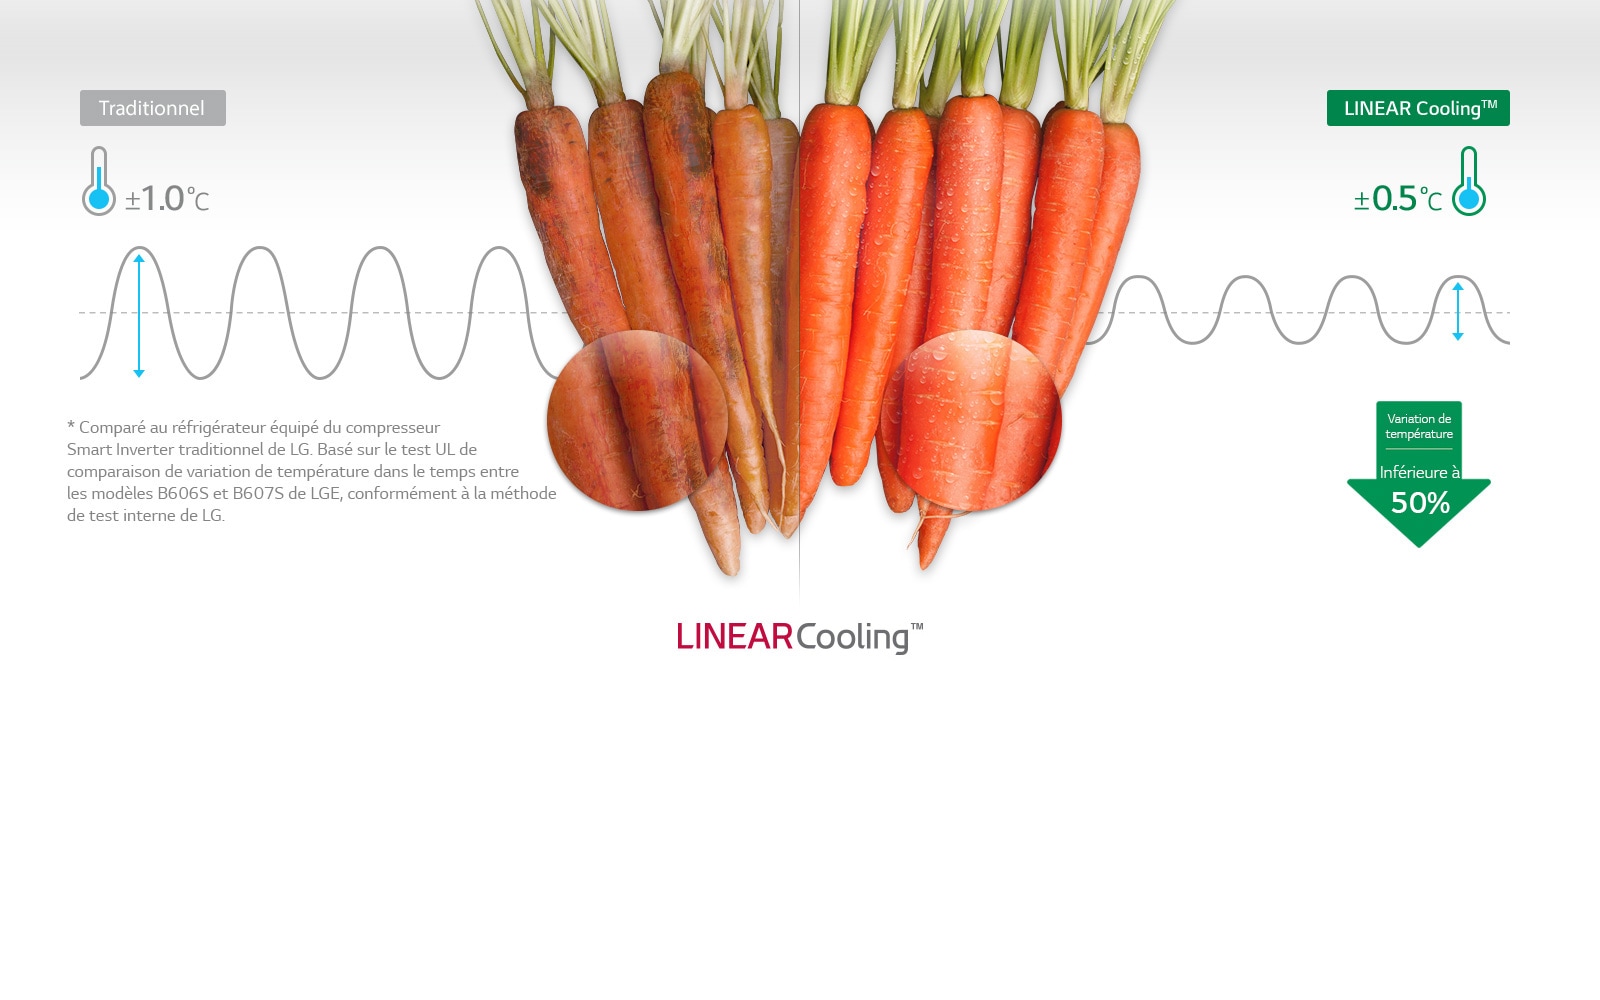 LINEAR Cooling™